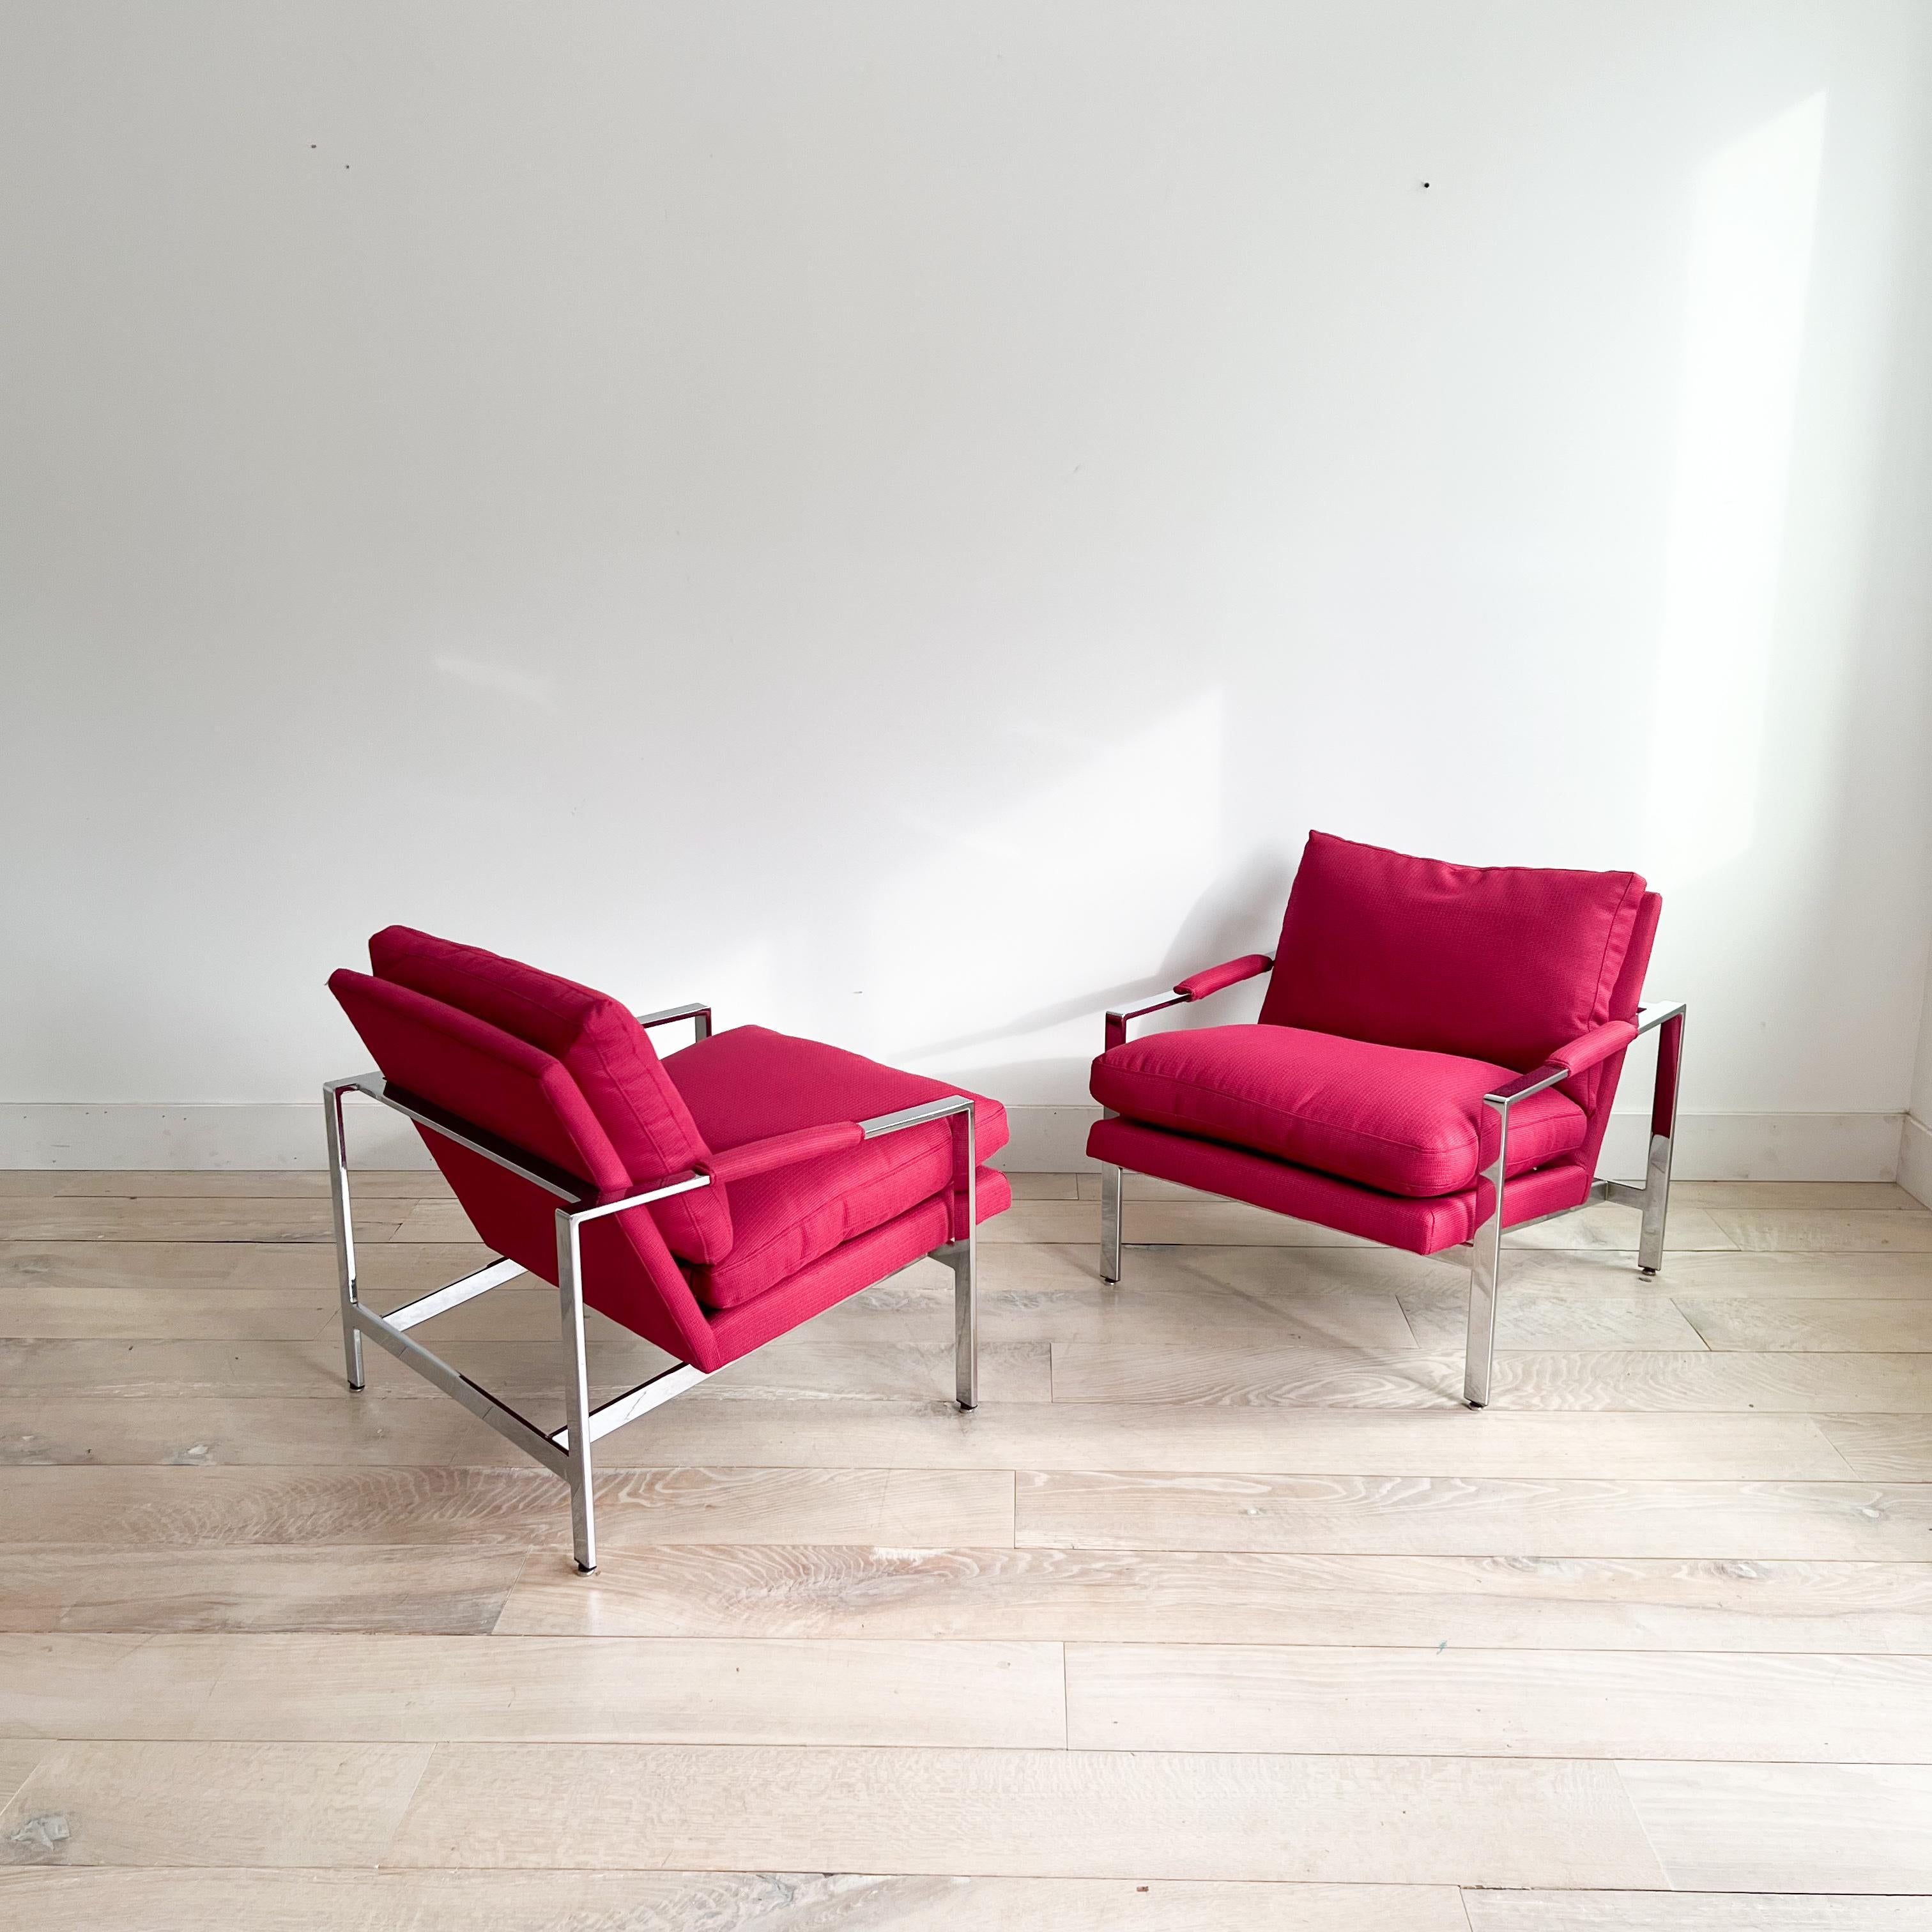 Elevate your living space with this stylish pair of mid-century modern lounge chairs by renowned designer Milo Baughman for Thayer Coggin. Crafted with sleek chrome frames and featuring vibrant bright pink upholstery, these chairs are sure to make a